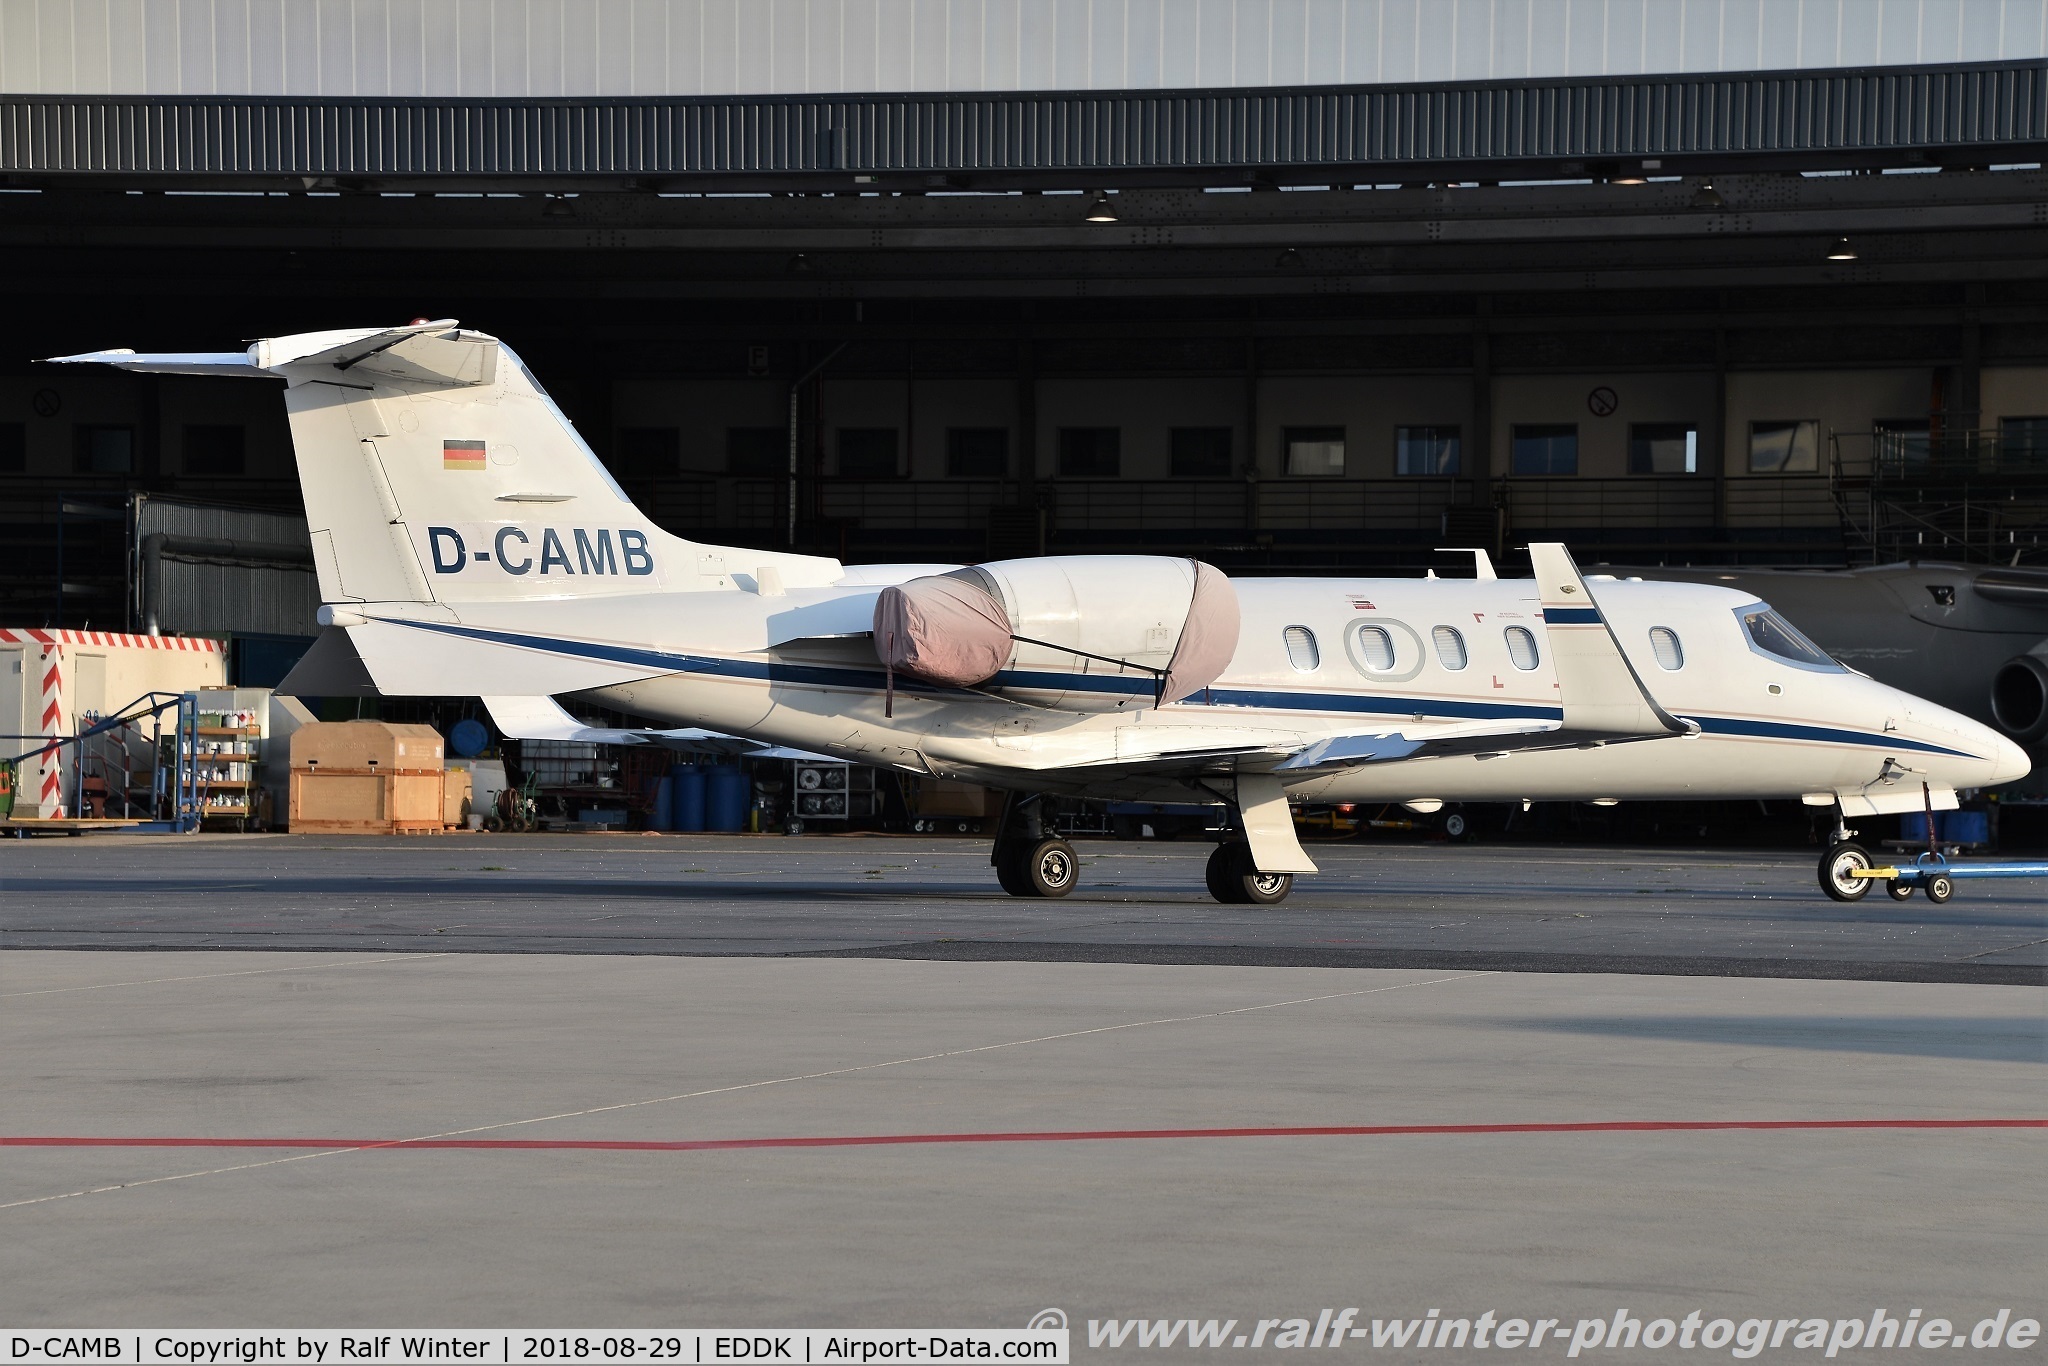 D-CAMB, 1998 Learjet 31A C/N 31-155, Learjet 31A - JCL Jetcall - 31-155 - D-CAMB - 29.08.2018 - CGN